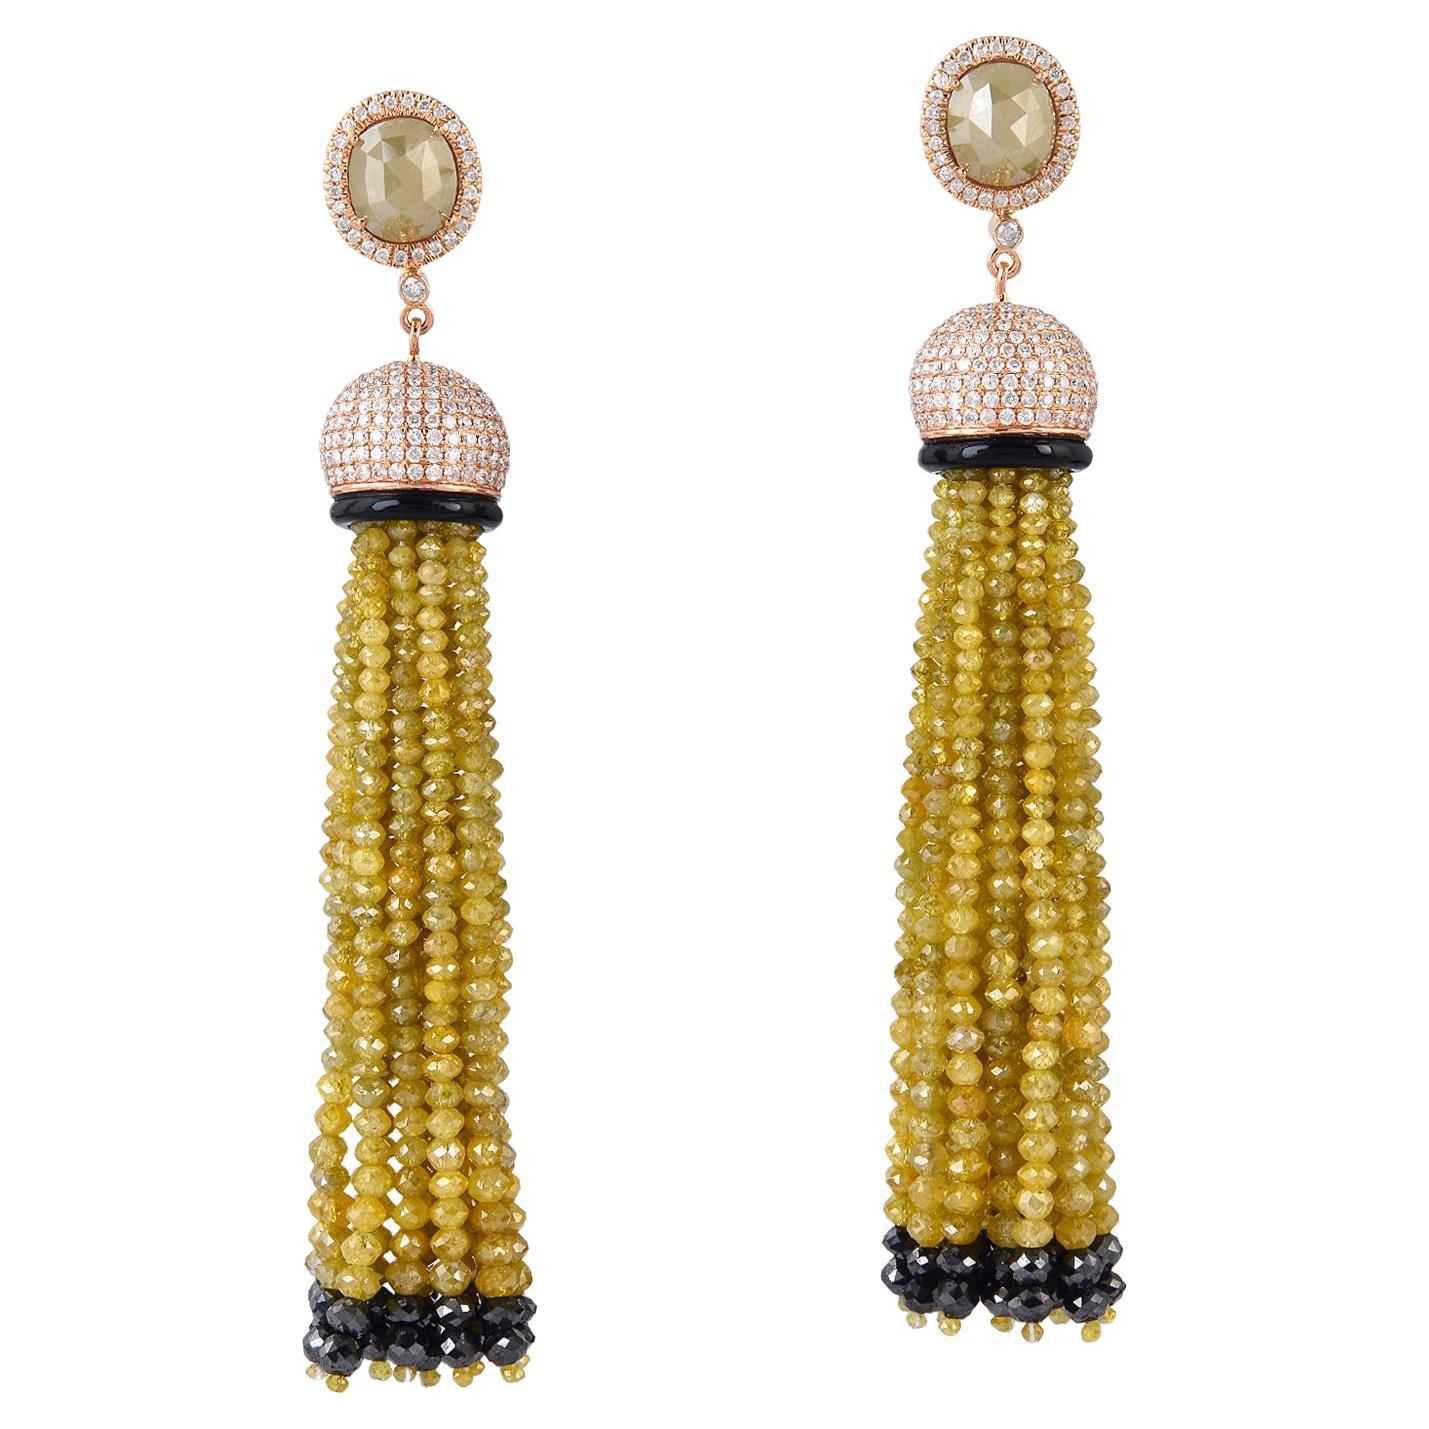 Yellow Diamond Tassel Earrings With White Diamond Pave Cap Made In 18k Rose Gold